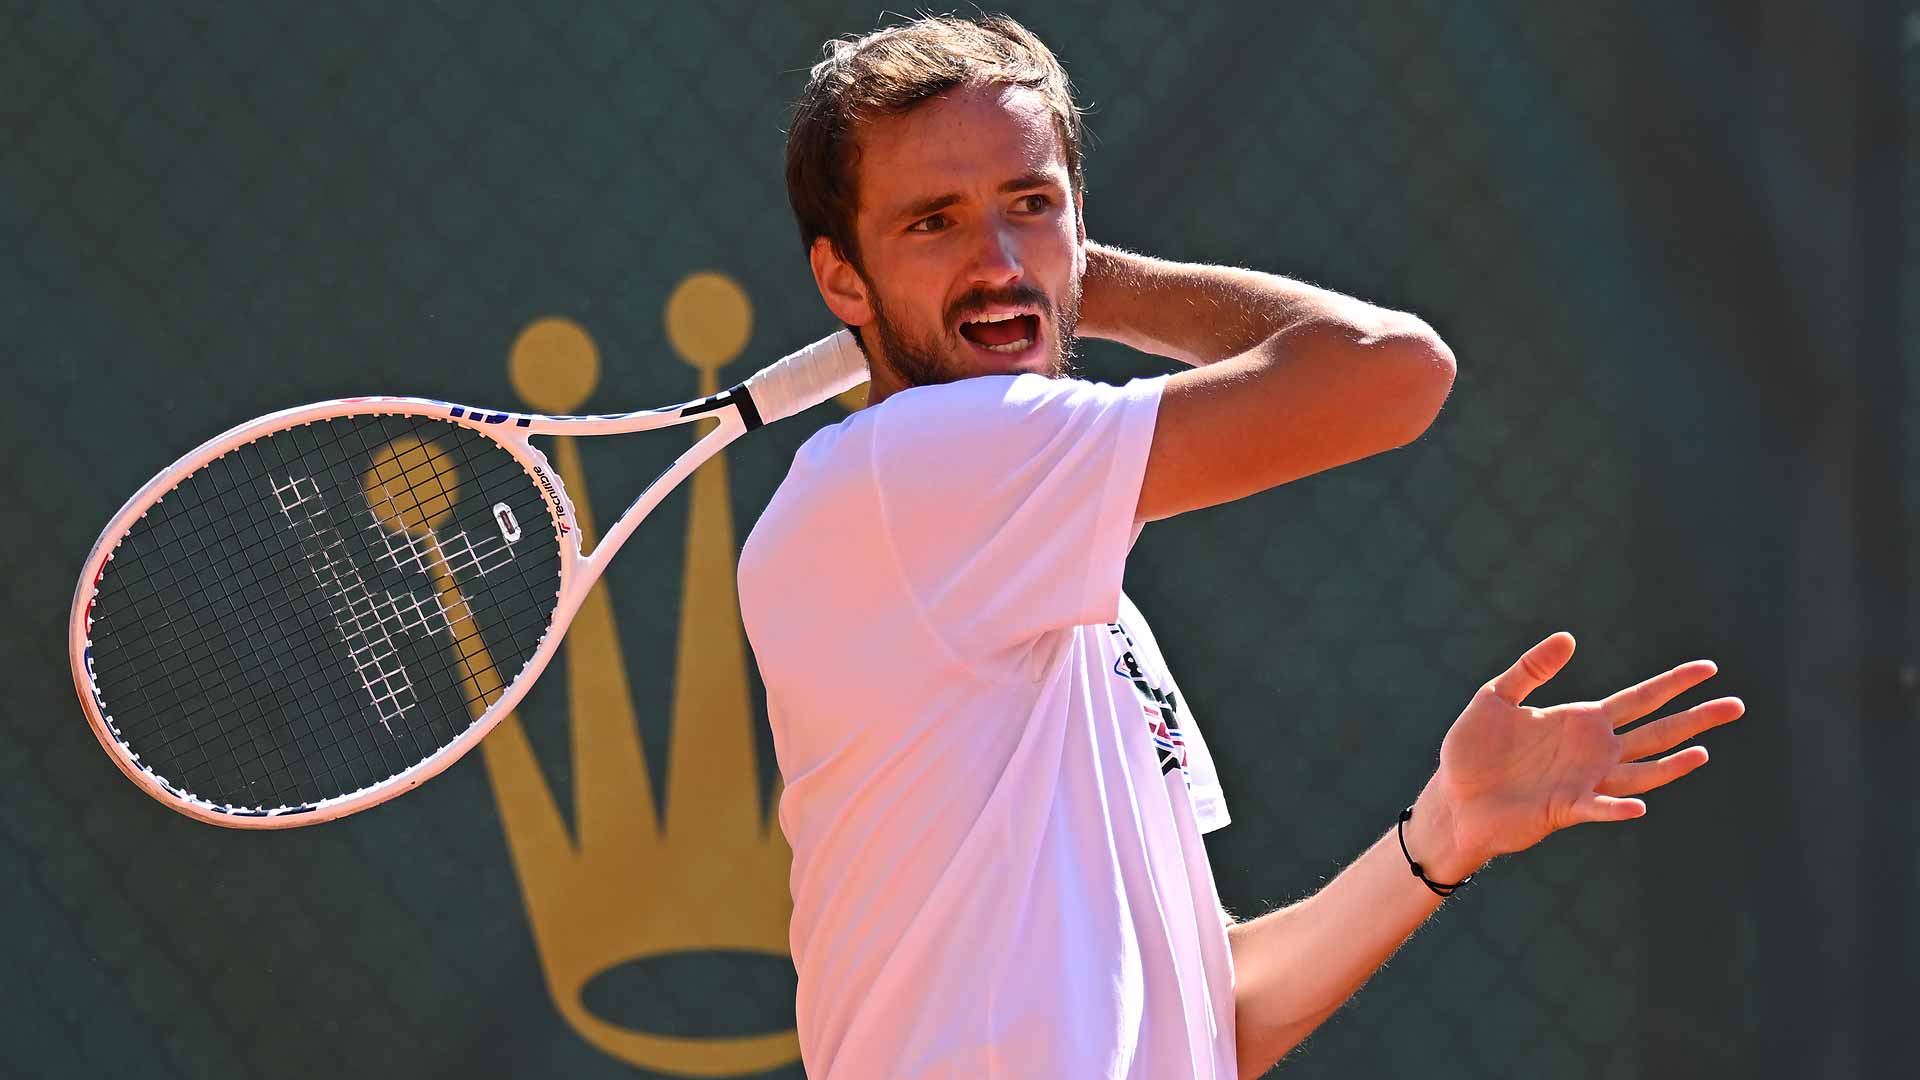 Daniil Medvedev will try to maintain his top form this week in Monte-Carlo.